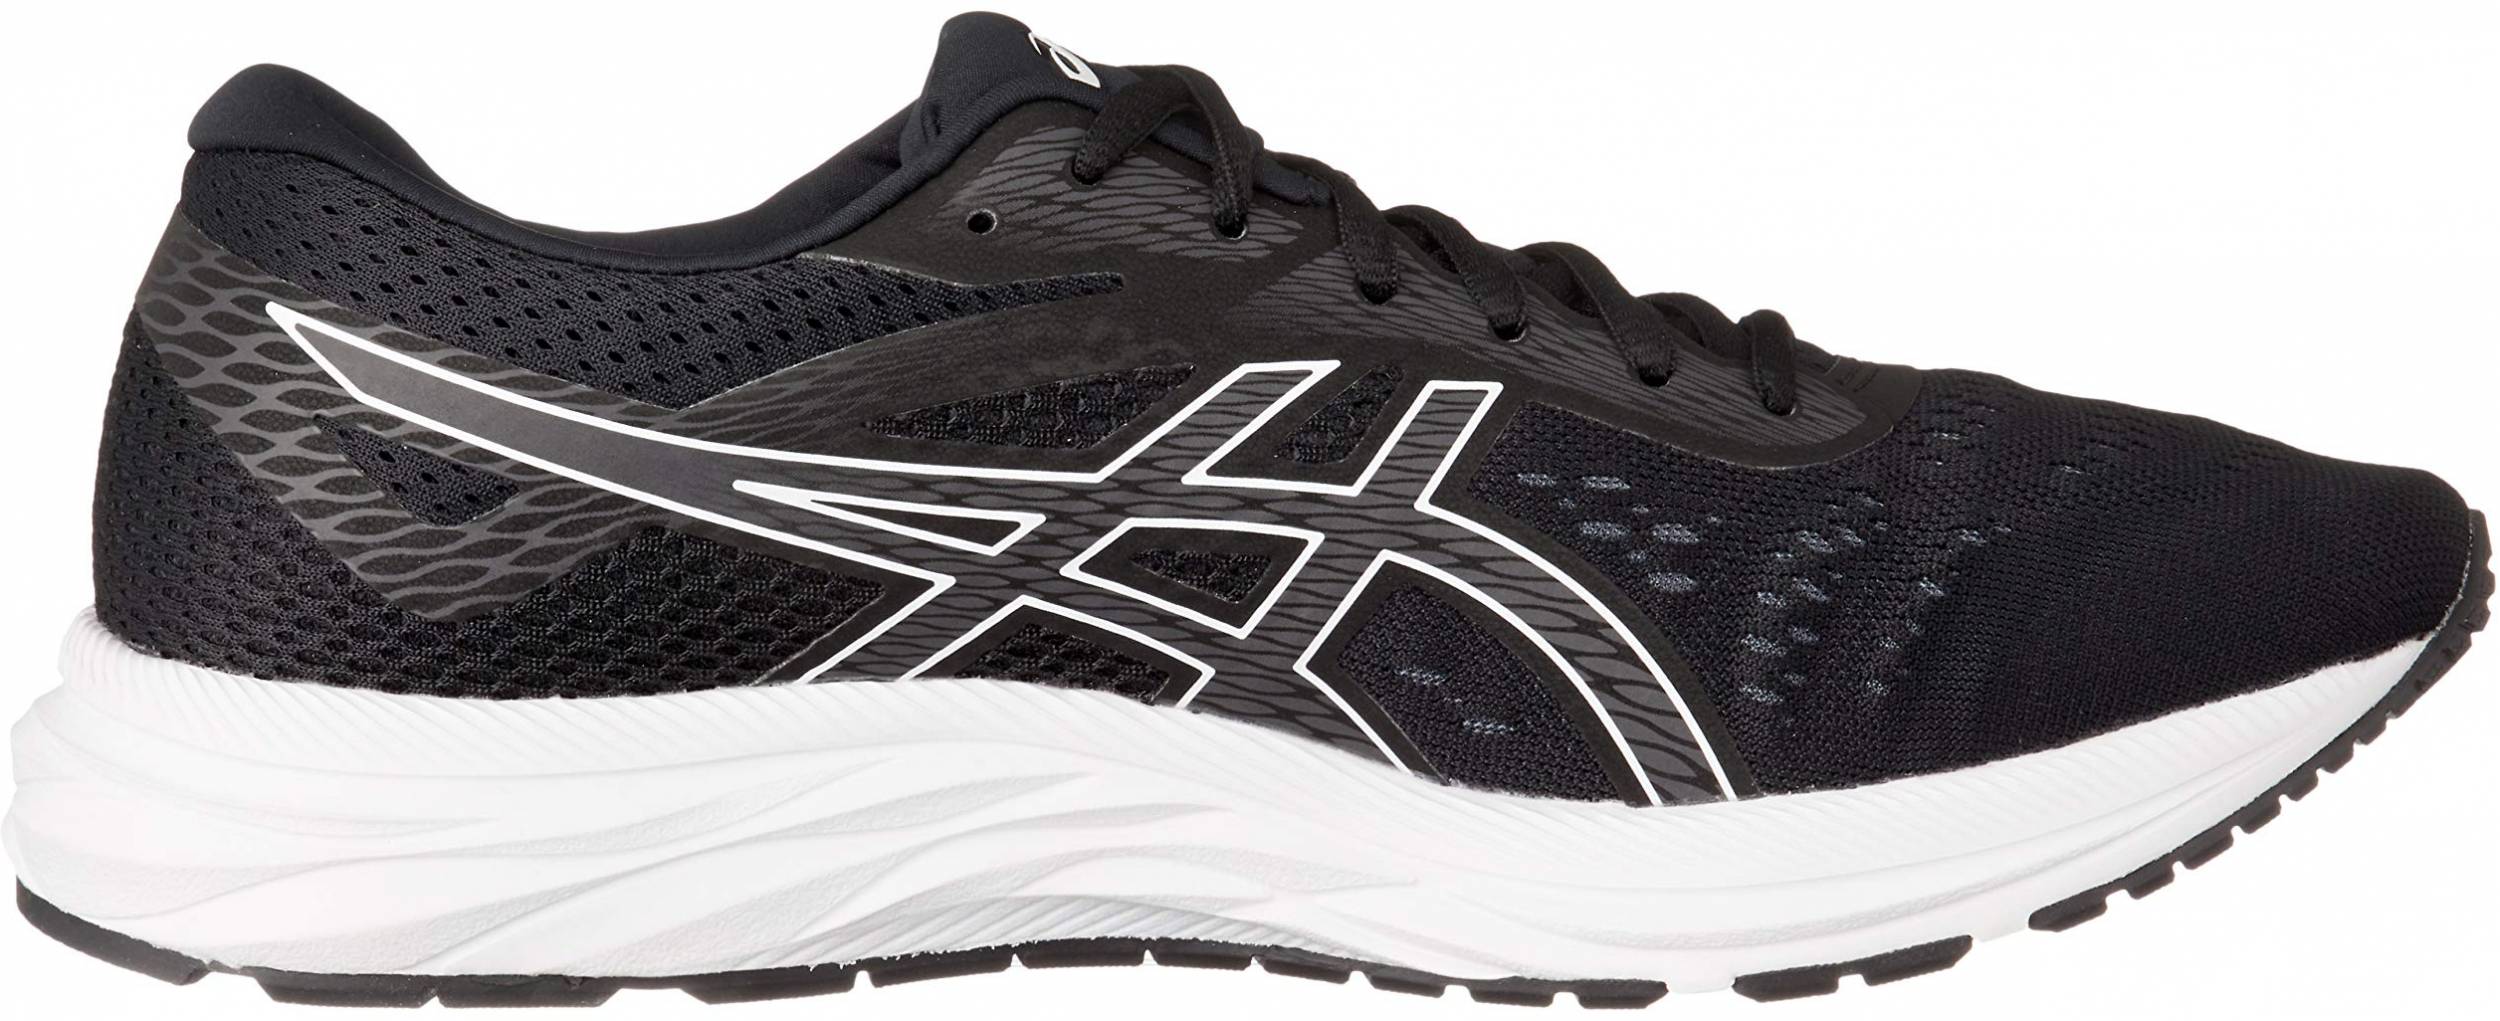 Only $40 + Review of Asics Gel Excite 6 